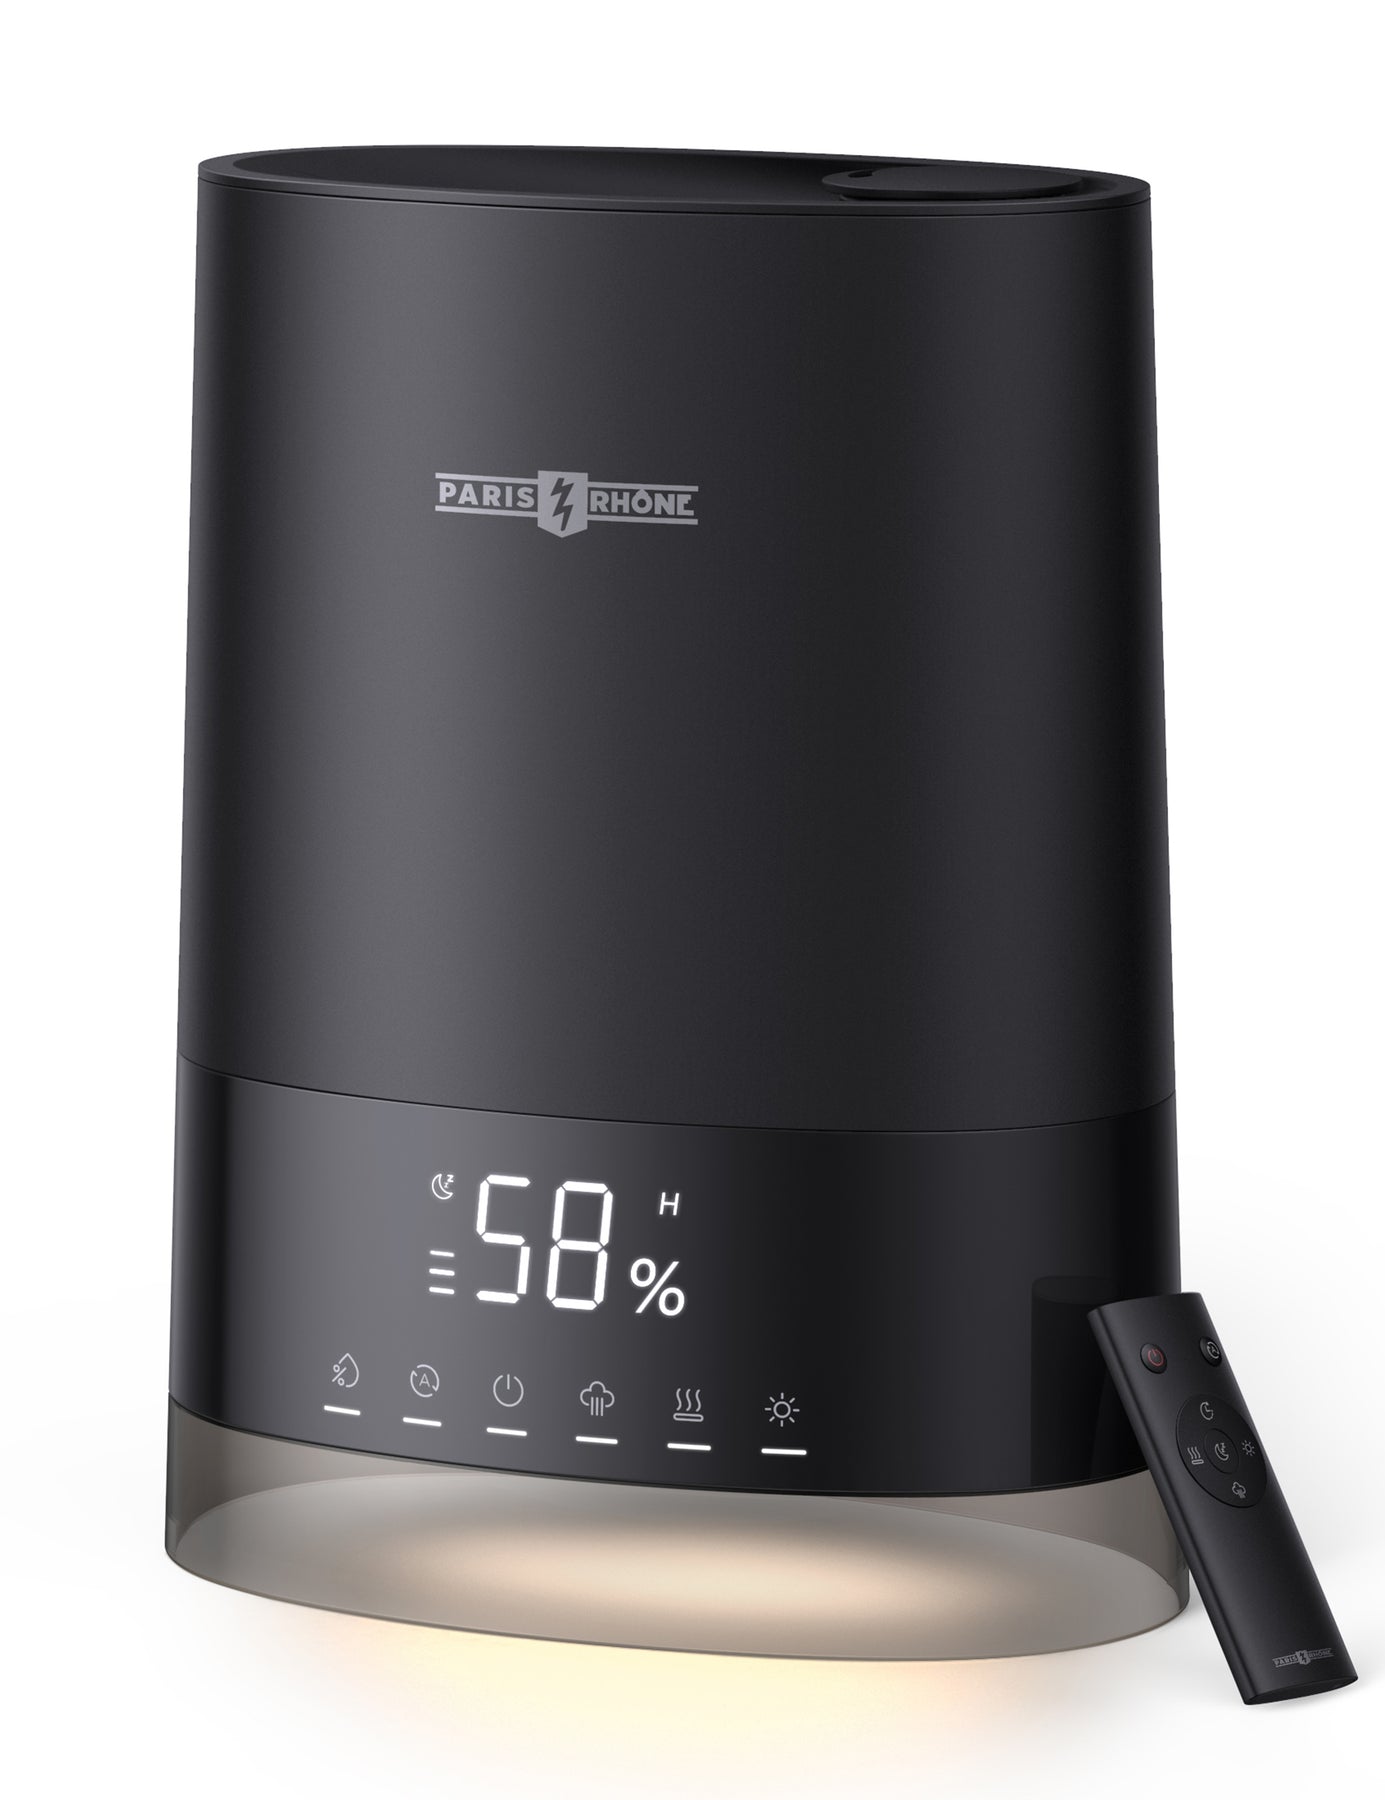 Image of Warm and Cool Mist Humidifiers for Large Room, 6L PARIS RHONE Ultrasonic Top Fill Air Humidifier